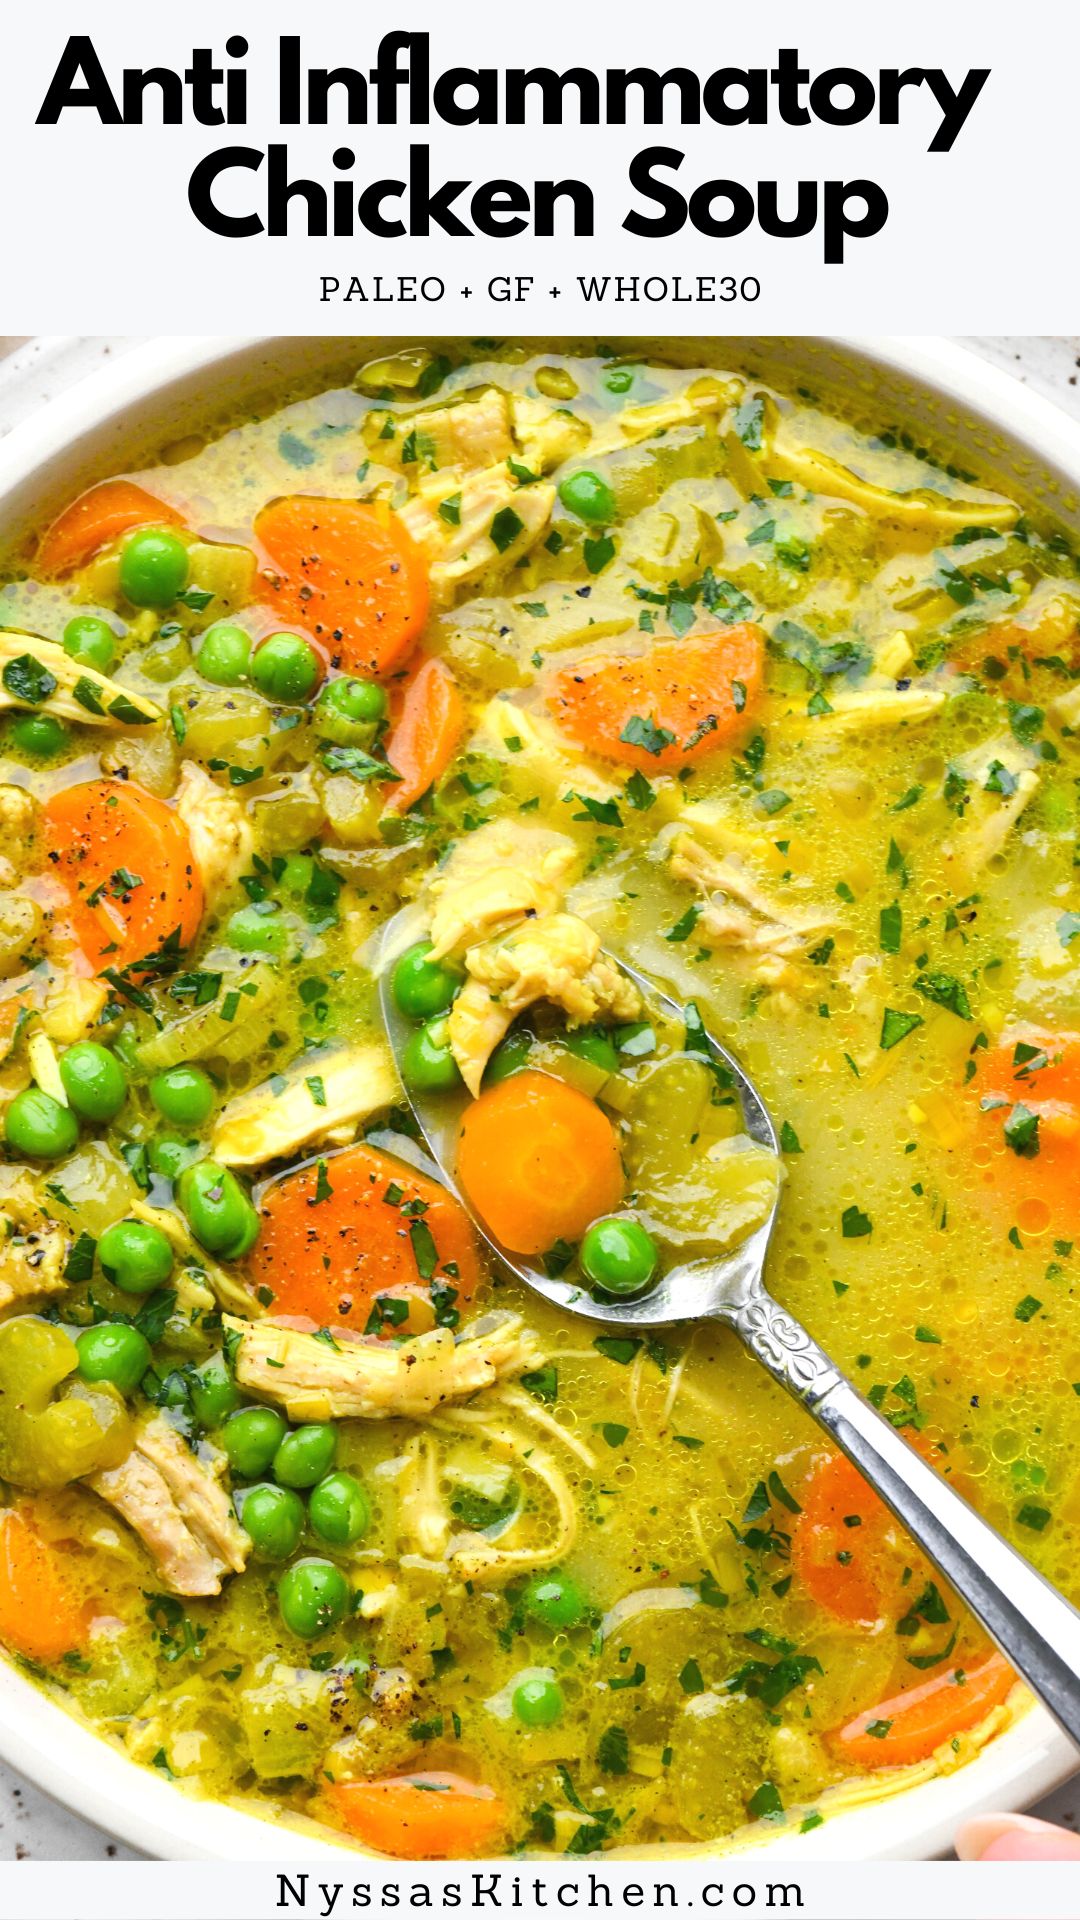 This anti inflammatory turmeric chicken soup is made in one pot with leeks, onions, carrots, celery, peas, chicken, chicken broth, coconut milk, and flavorful spices. It is packed with nutrients, and perfect for meal prep or family dinner. The best way to warm up with when you need some homemade nourishment! Dairy free, paleo, gluten free, vegetarian option.